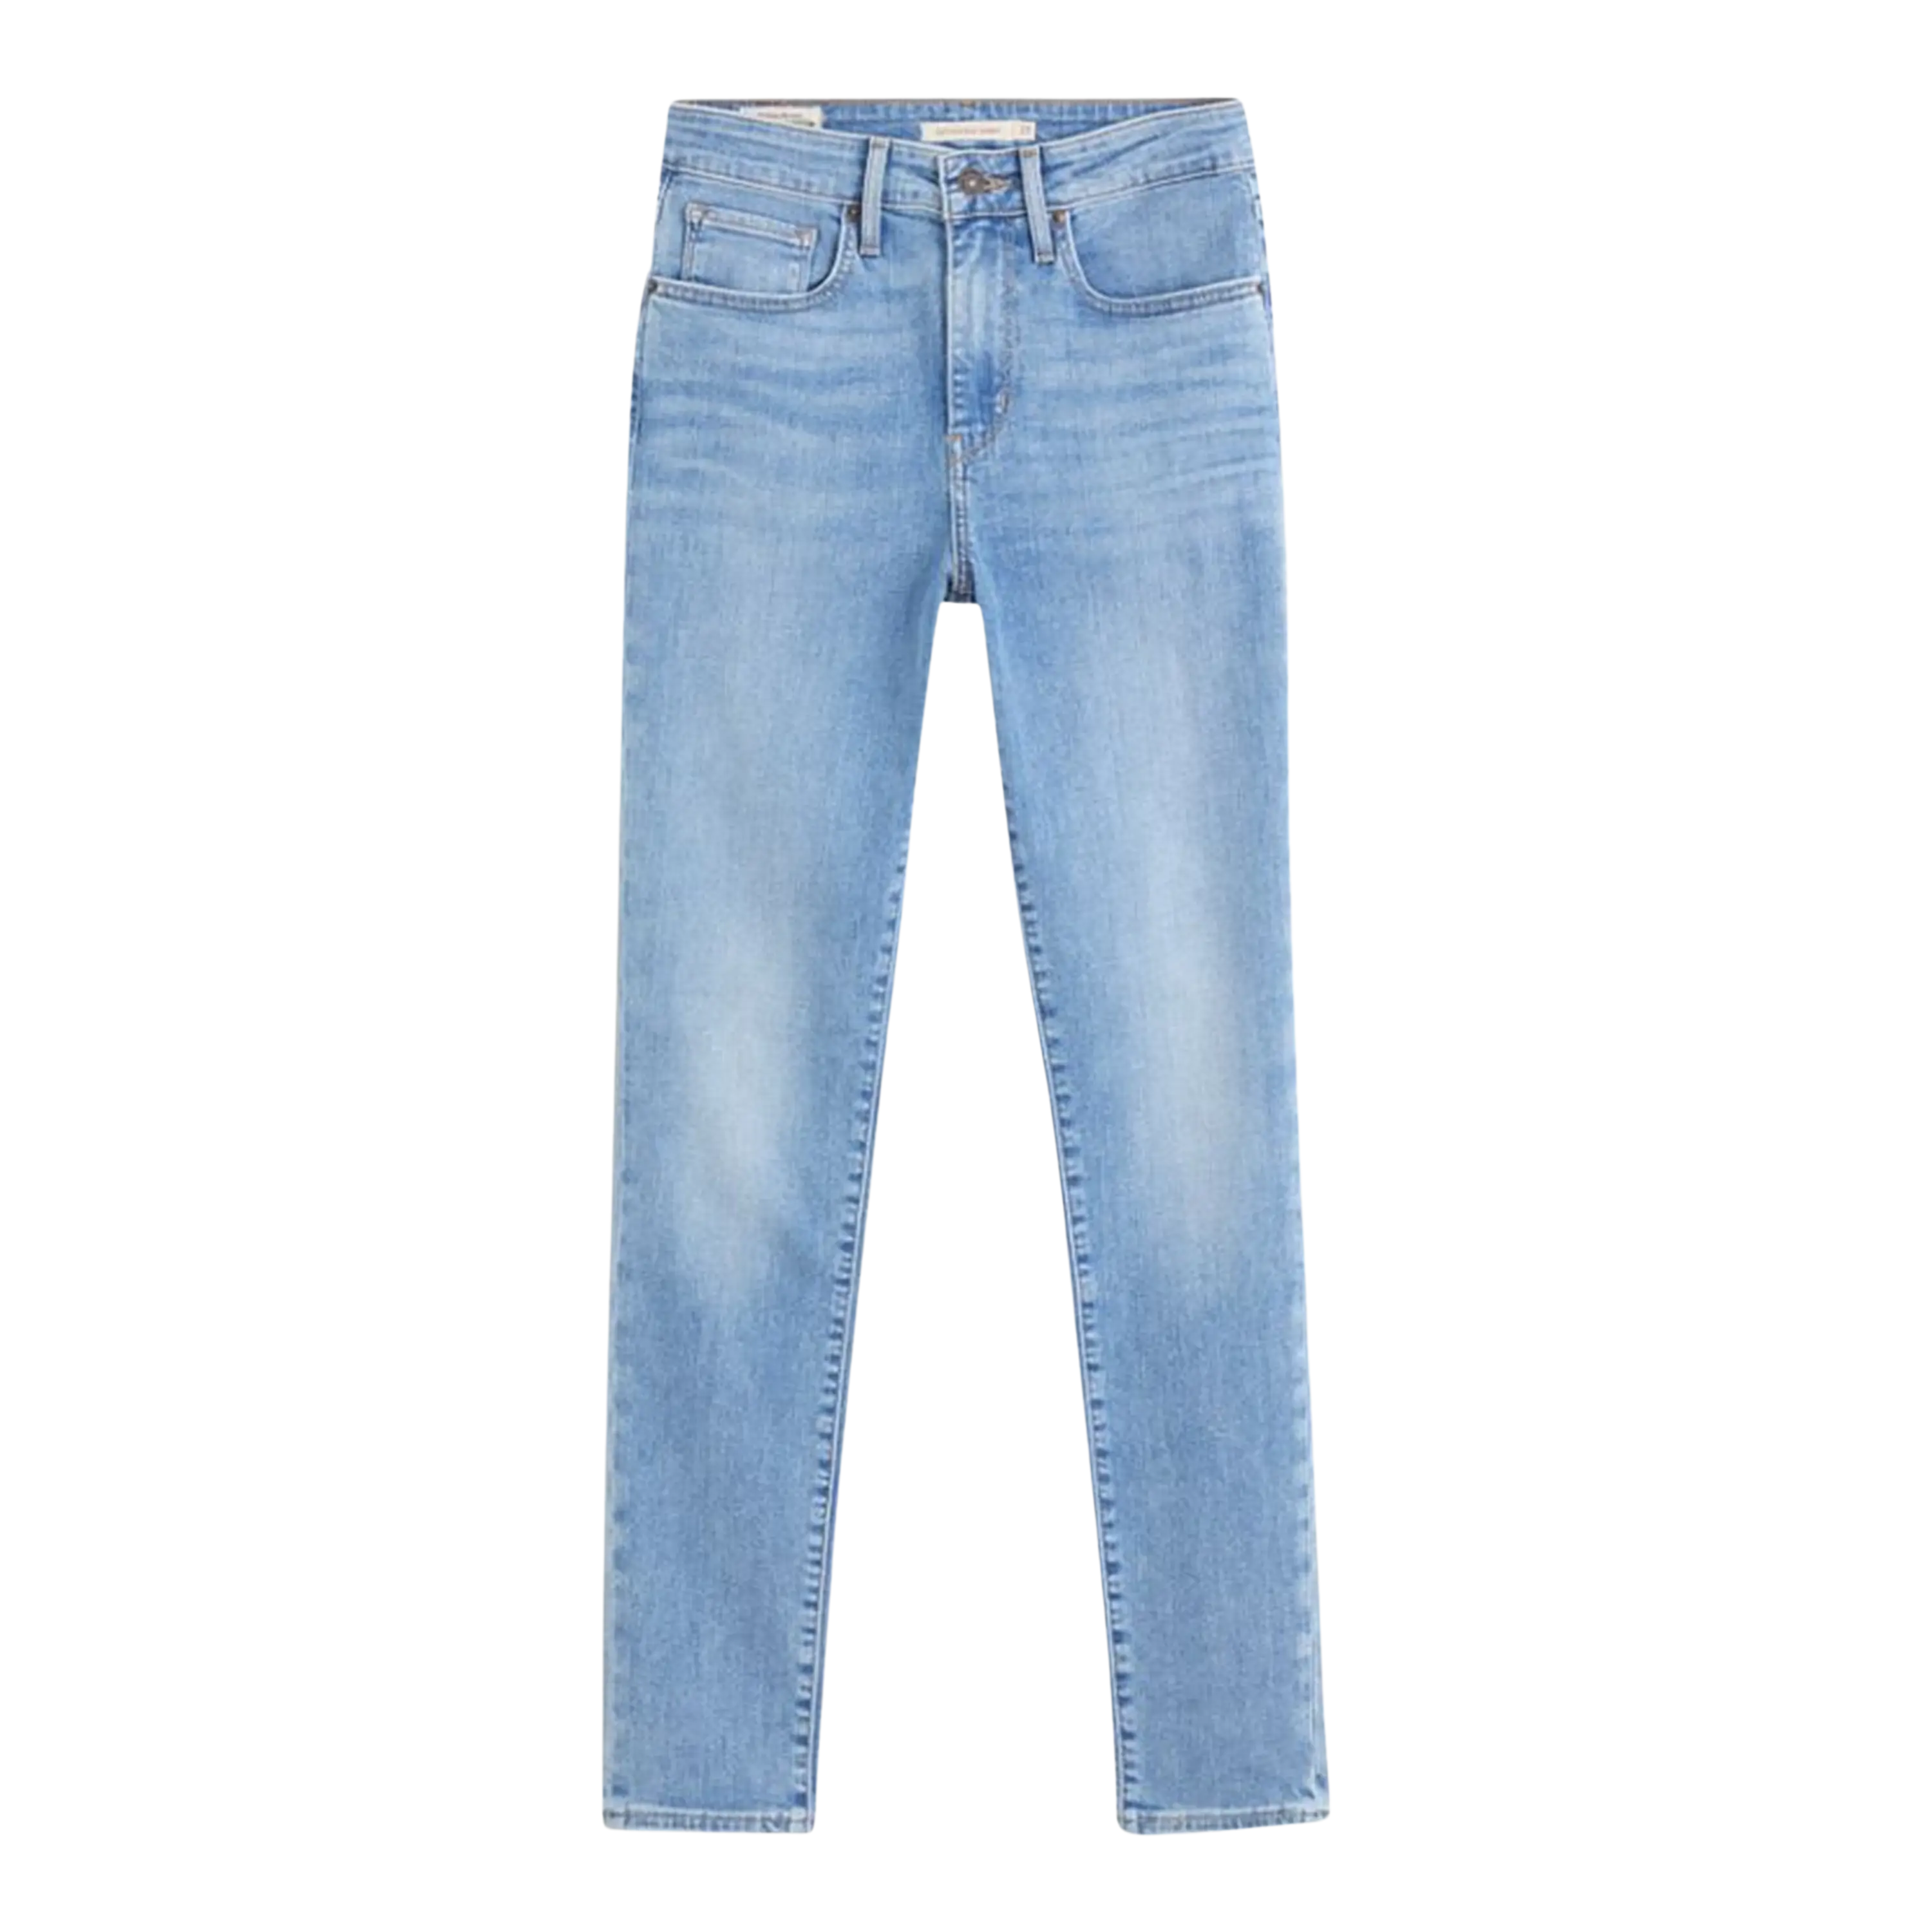 Levi’s 721 High Rise Skinny Jeans for Women